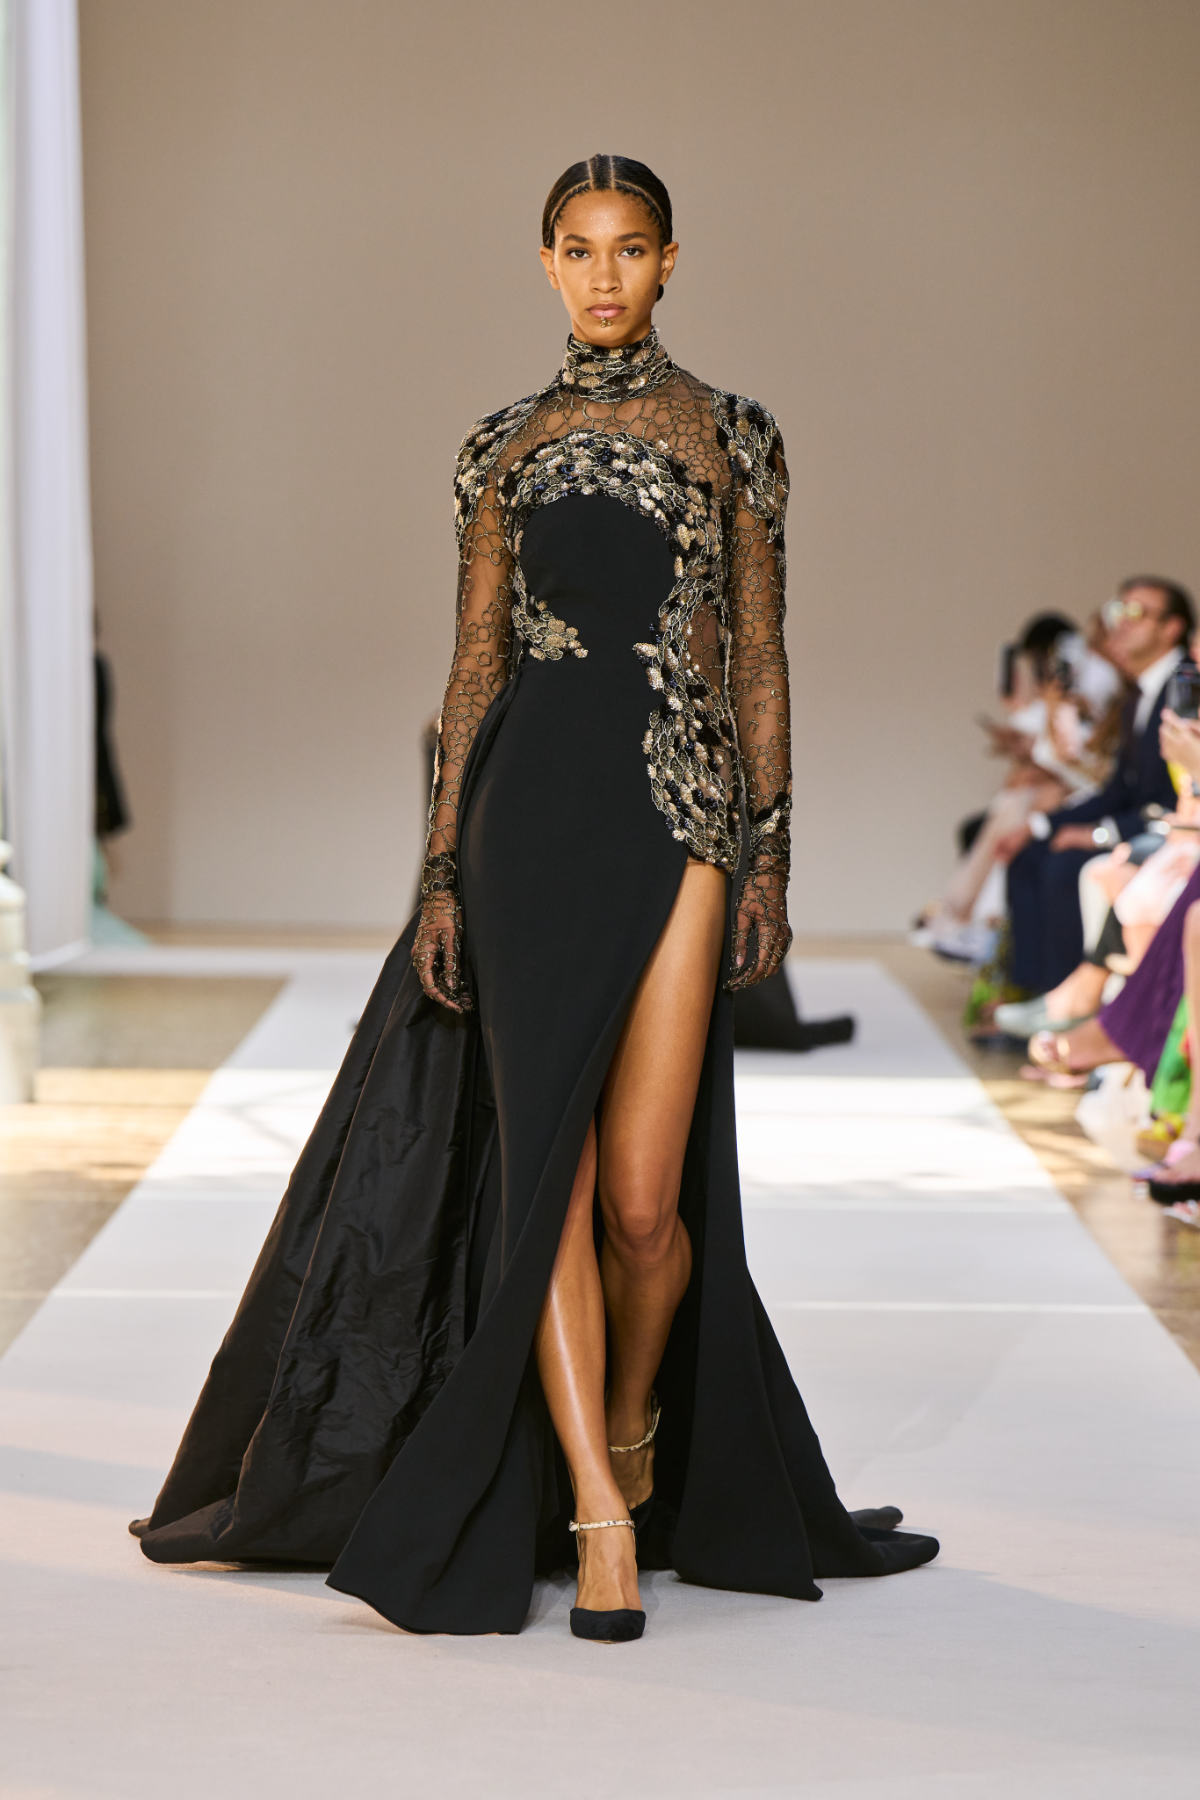 Elie Saab Presents Its New Haute Couture Fall Winter 2022-23 Collection: The Beginning Of Twilight